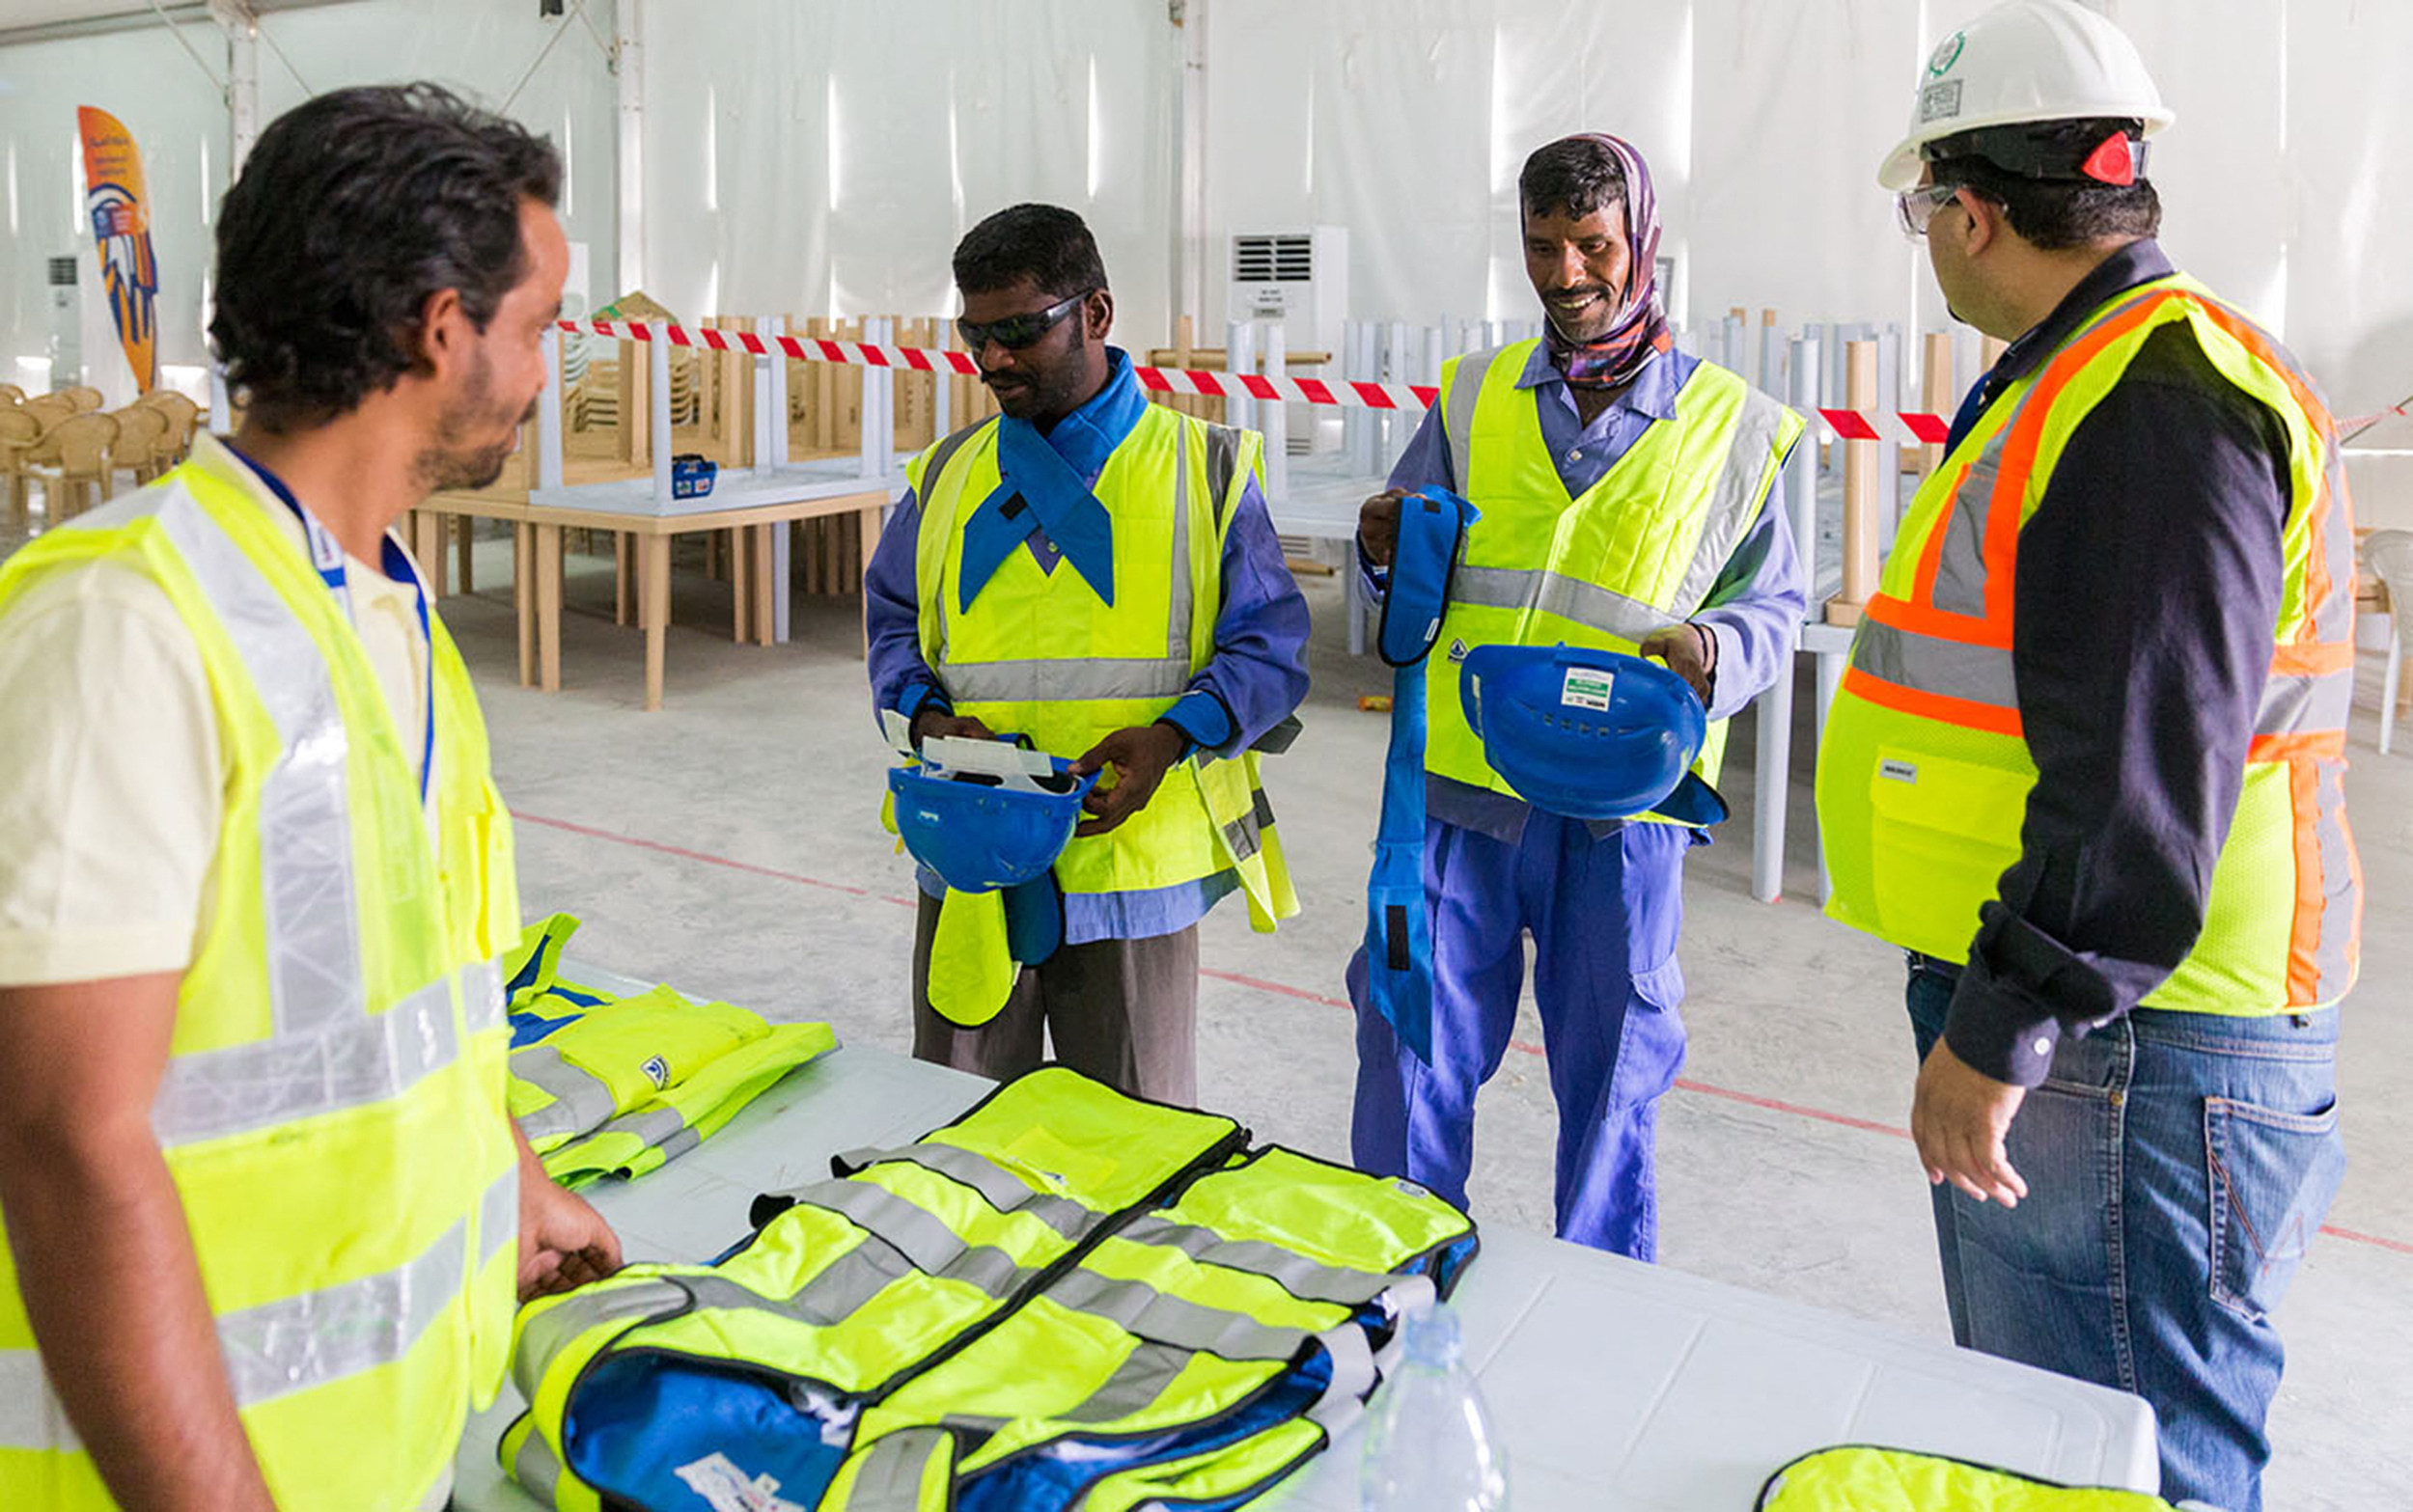 Workers in Qatar who built stadiums for last year’s World Cup try out cooling vests in 2018. As climate change causes temperatures to soar, start-ups around the world are developing clothing that beats the heat in innovative ways. Photo: AFP